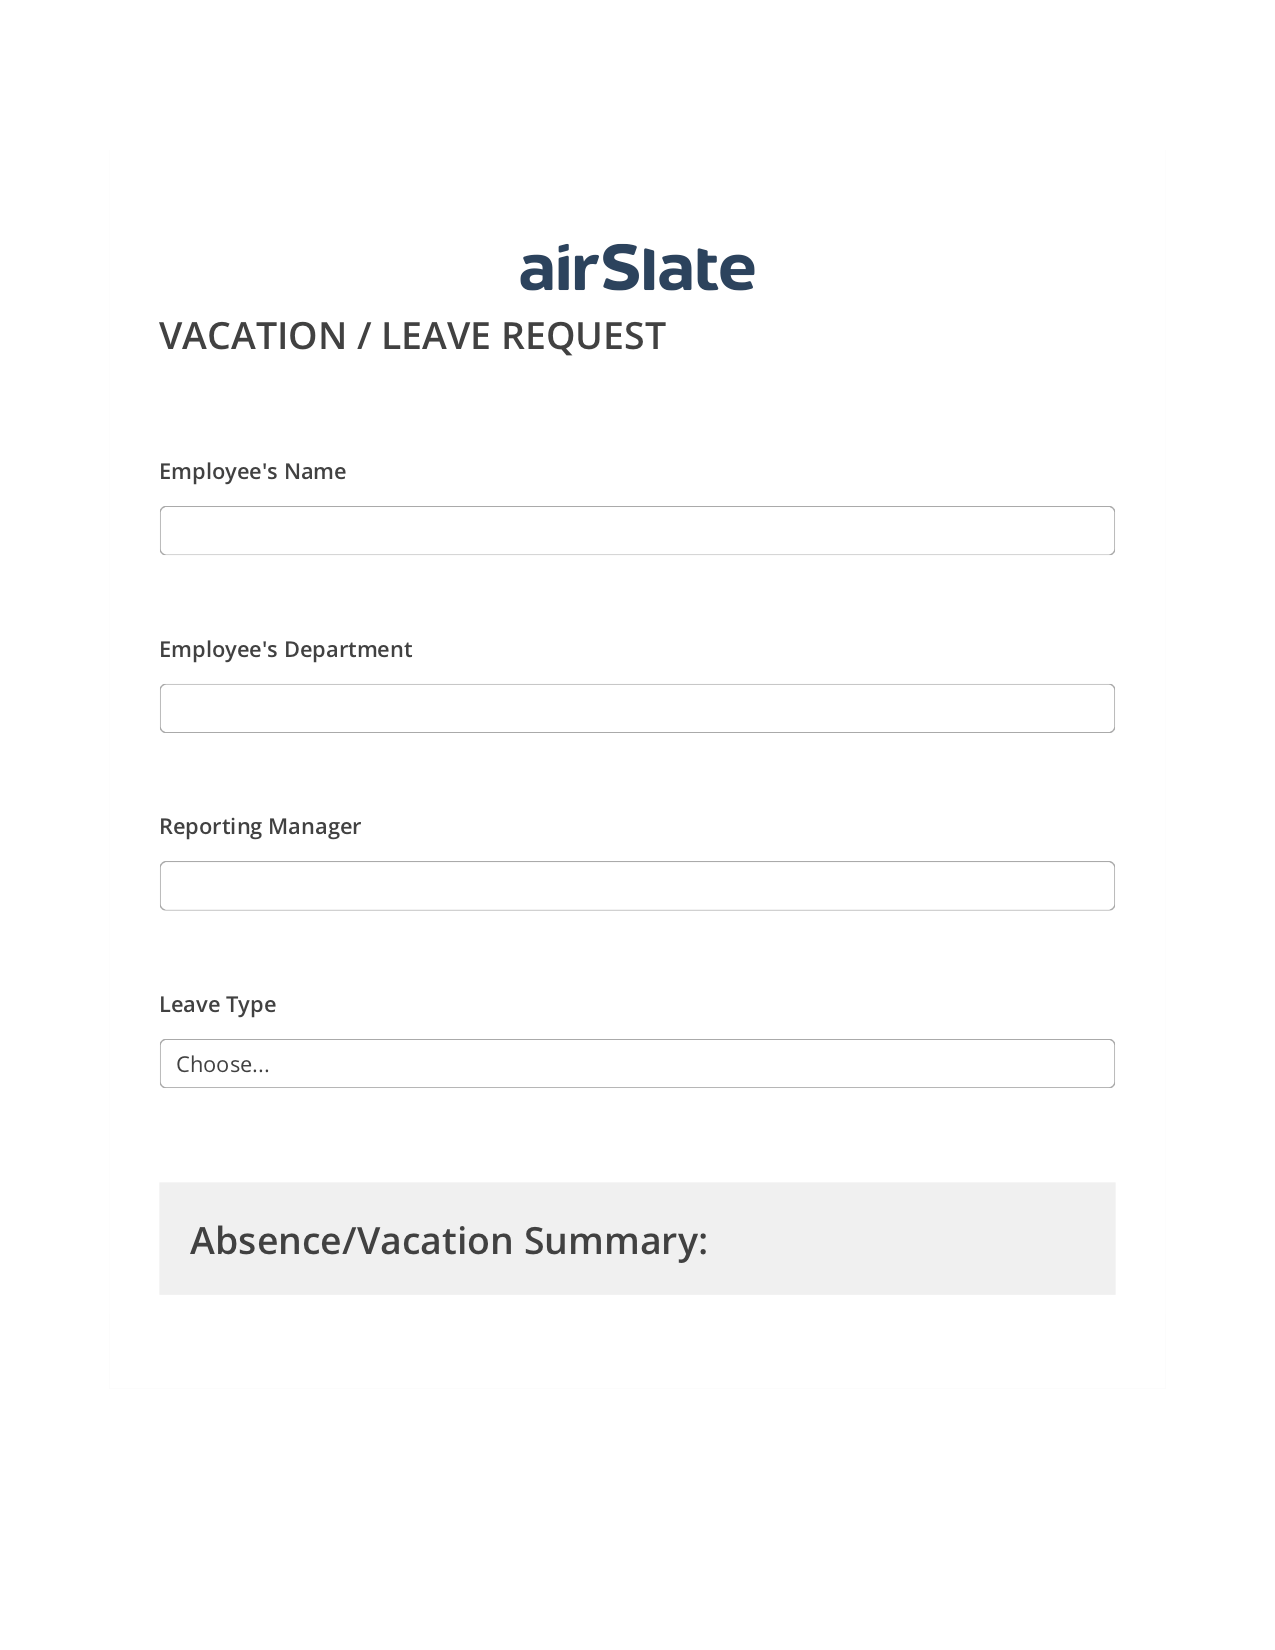 Vacation/Leave Request Workflow Pre-fill Document Bot, Add Tags to Slate Bot, Archive to Google Drive Bot